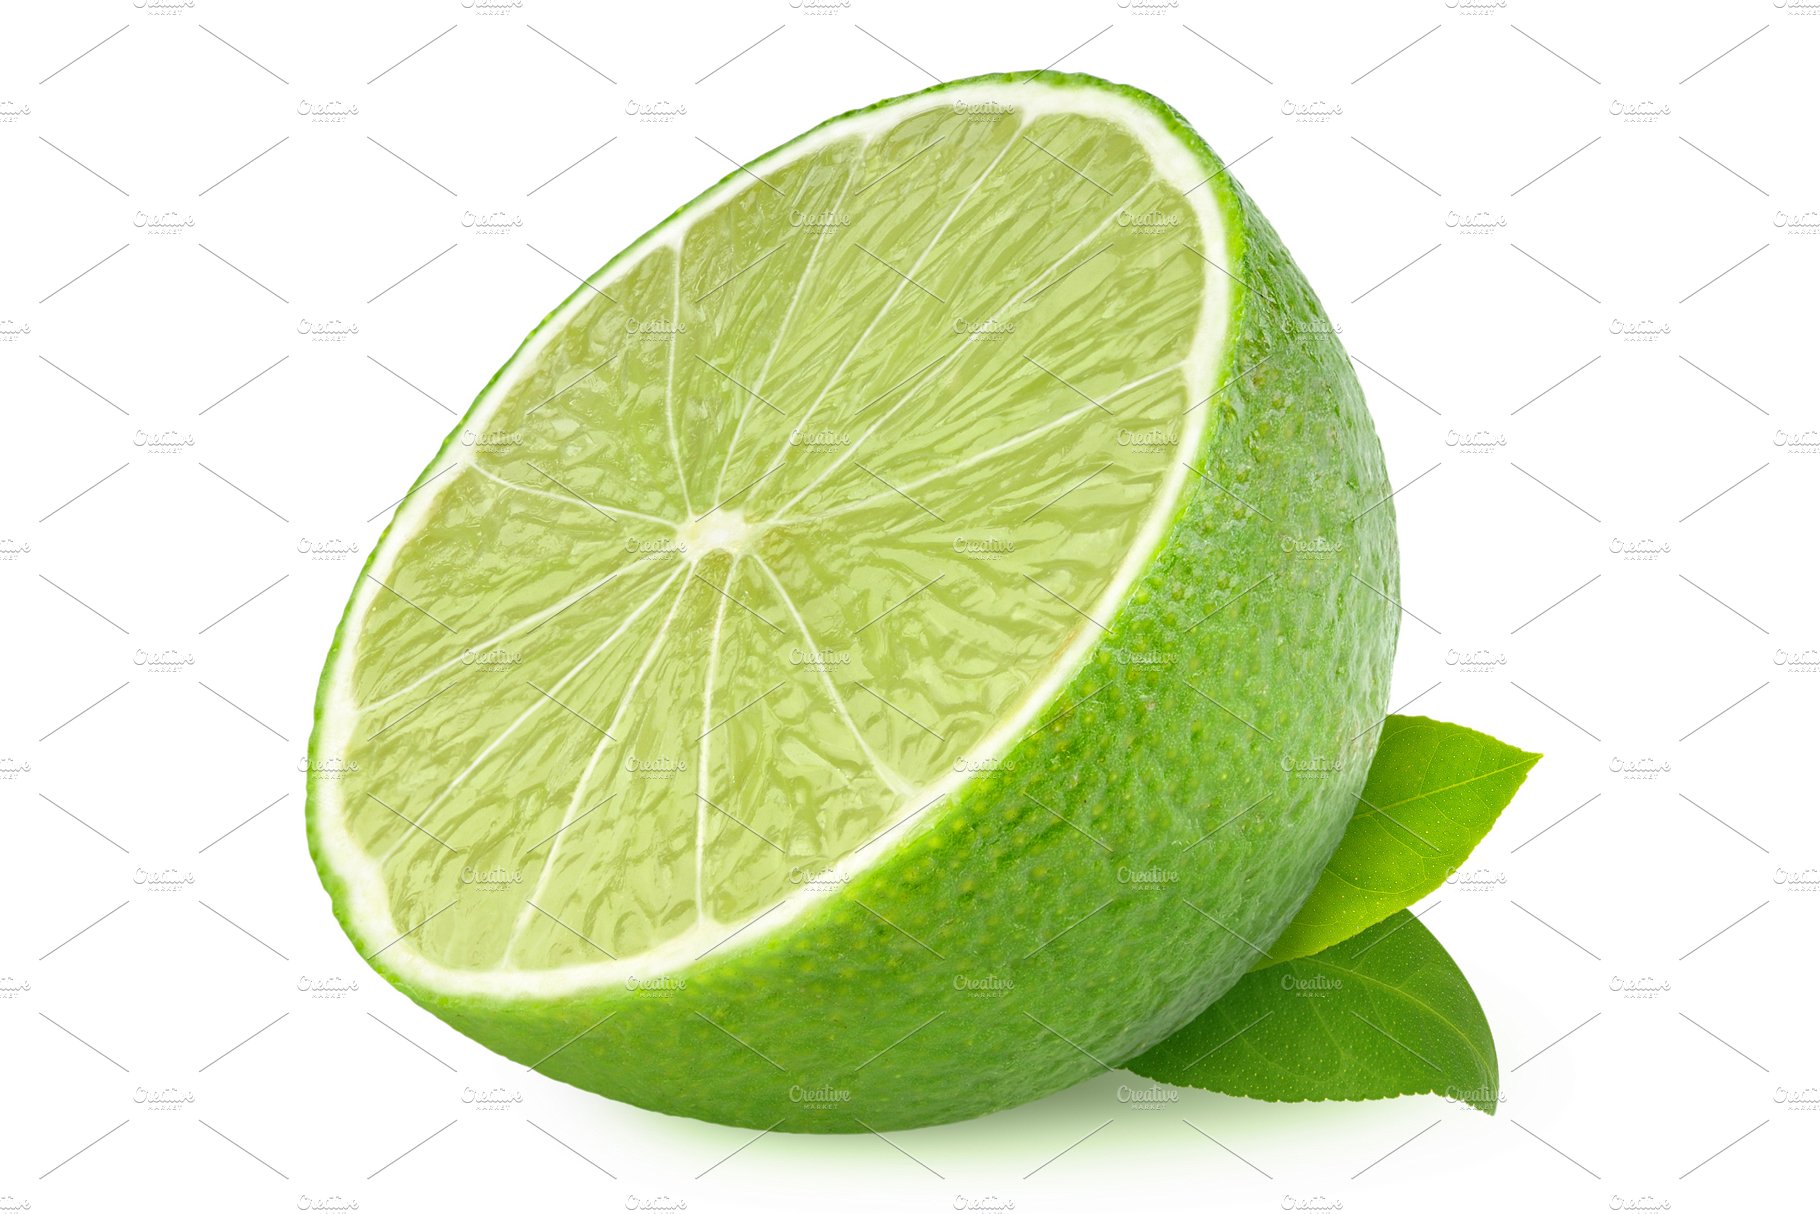 Half of lime cover image.